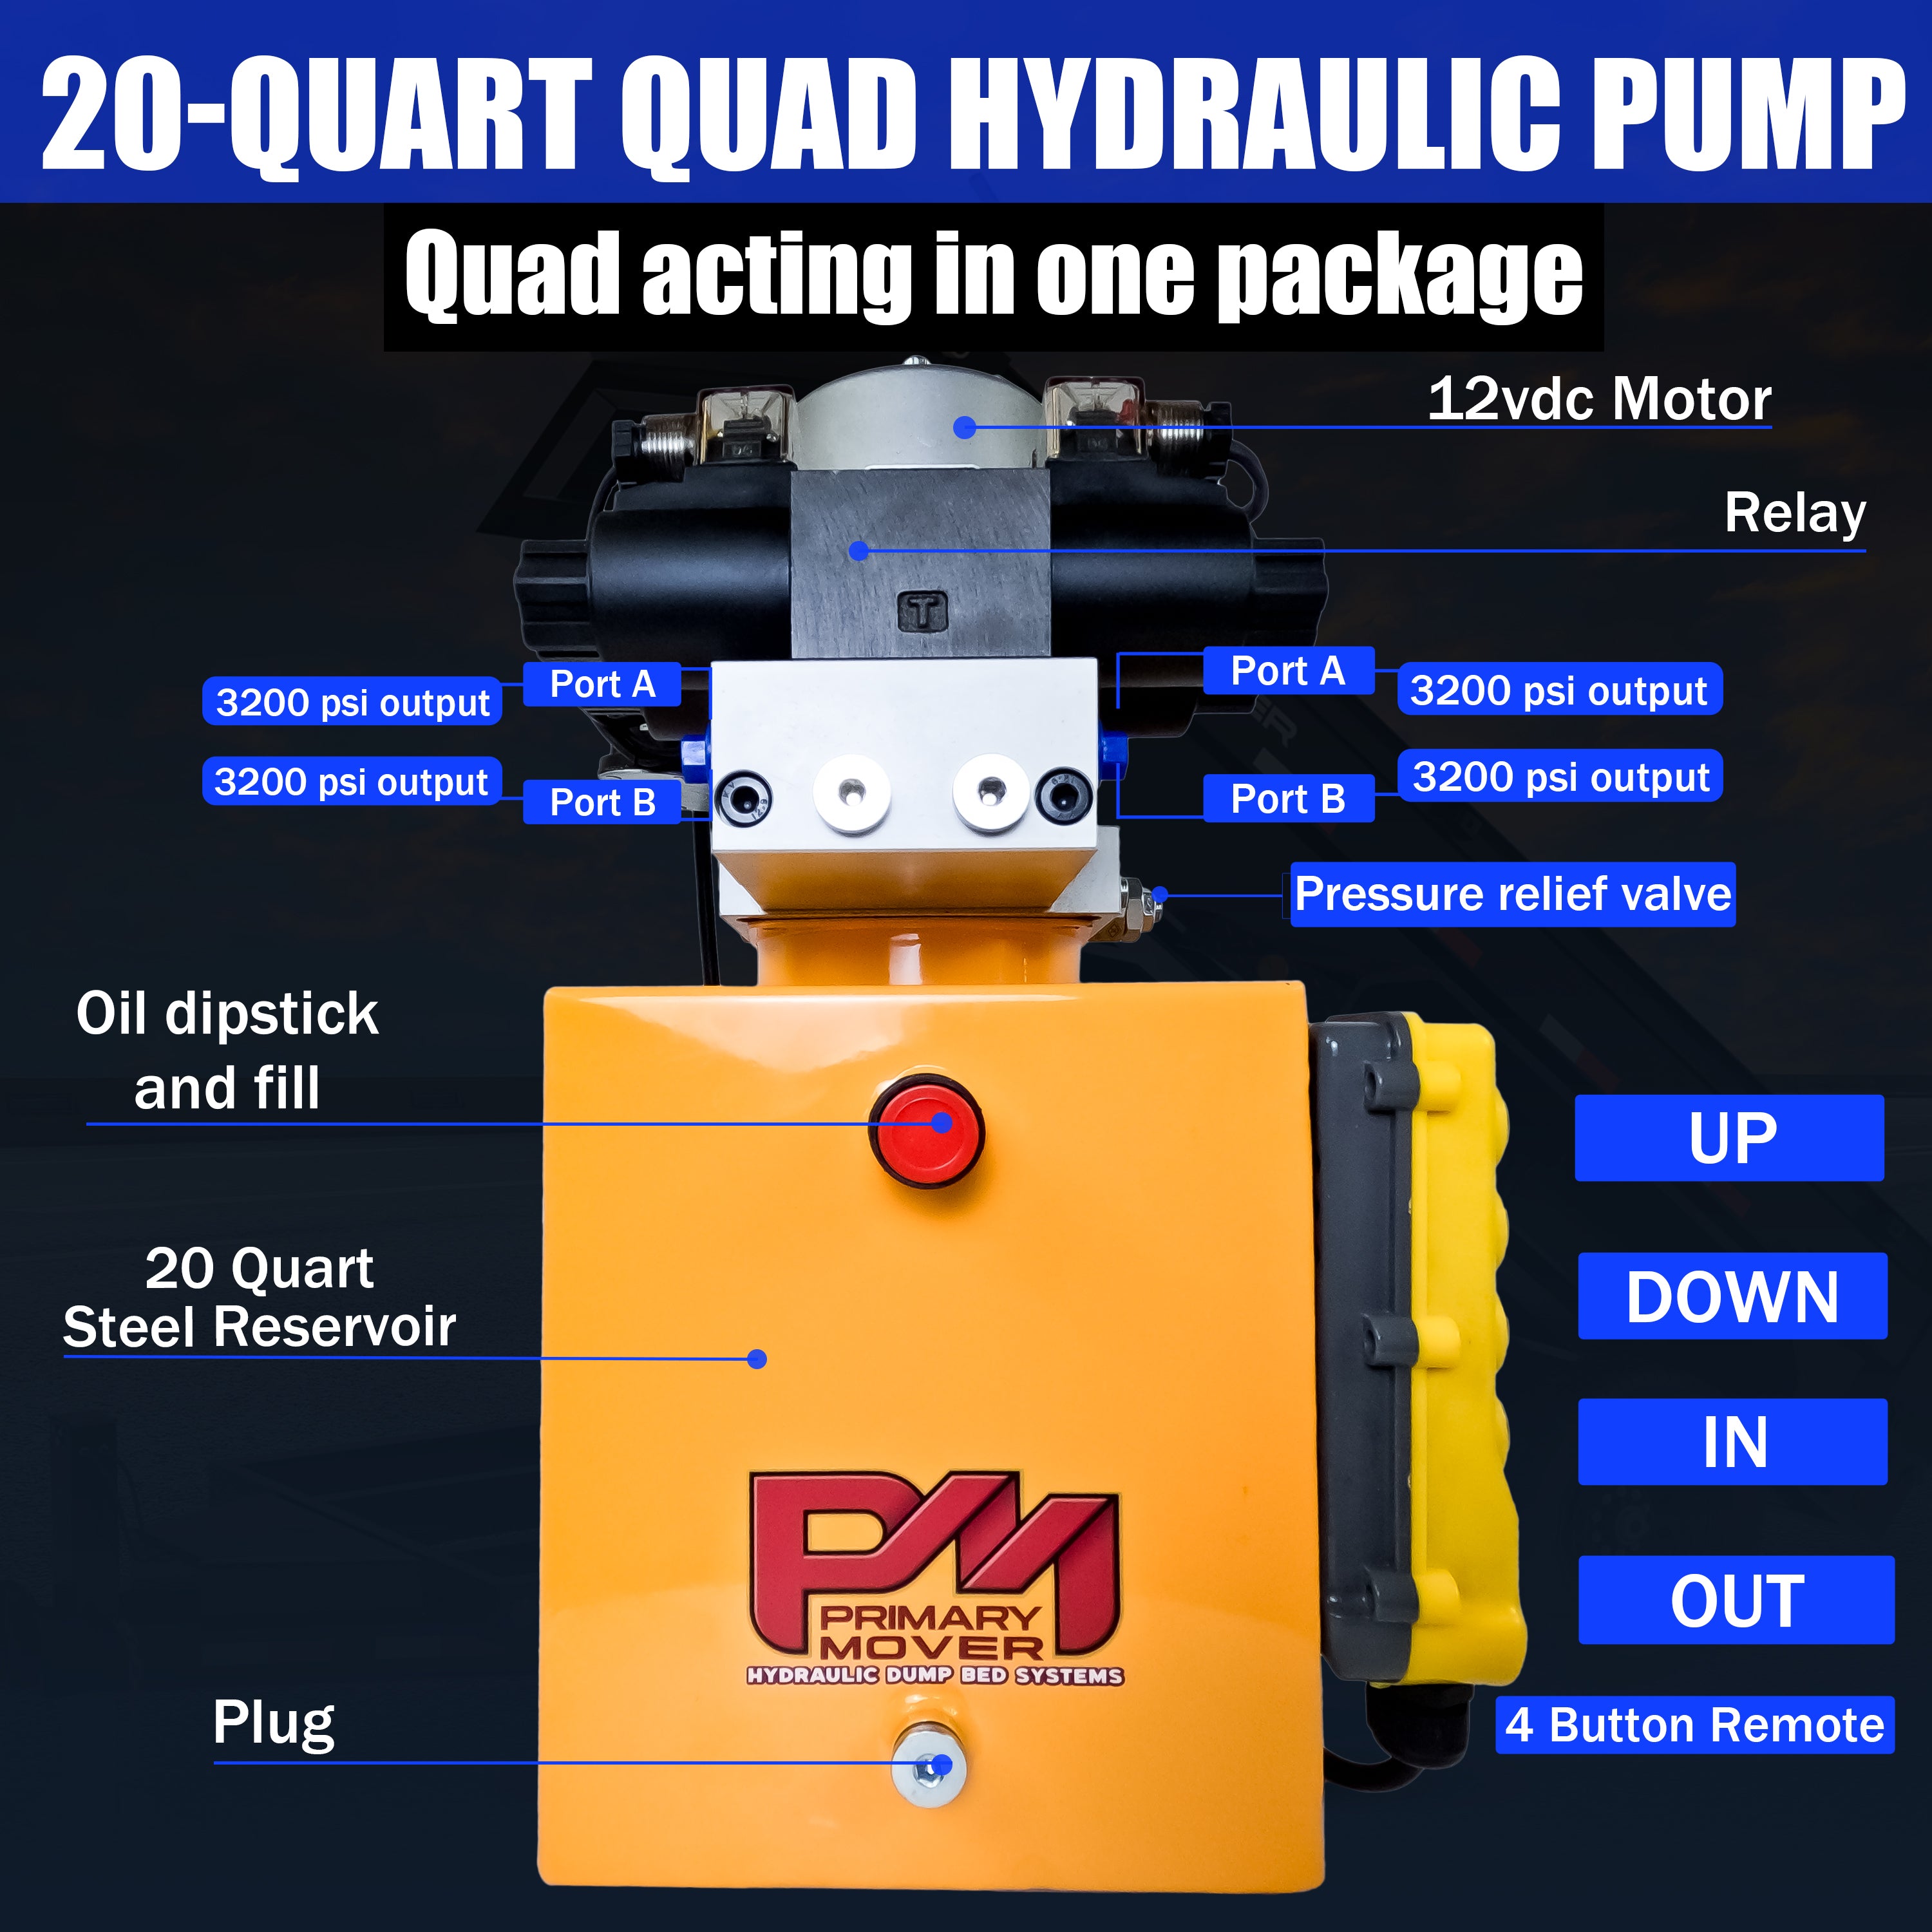 Primary Mover 12V Dual Double-Acting Hydraulic Power Unit: Compact, powerful solution for dump trailers and trucks, enabling four hydraulic actions simultaneously. Built for durability and efficiency. Used for any truck or trailer application. 1/2 ton.